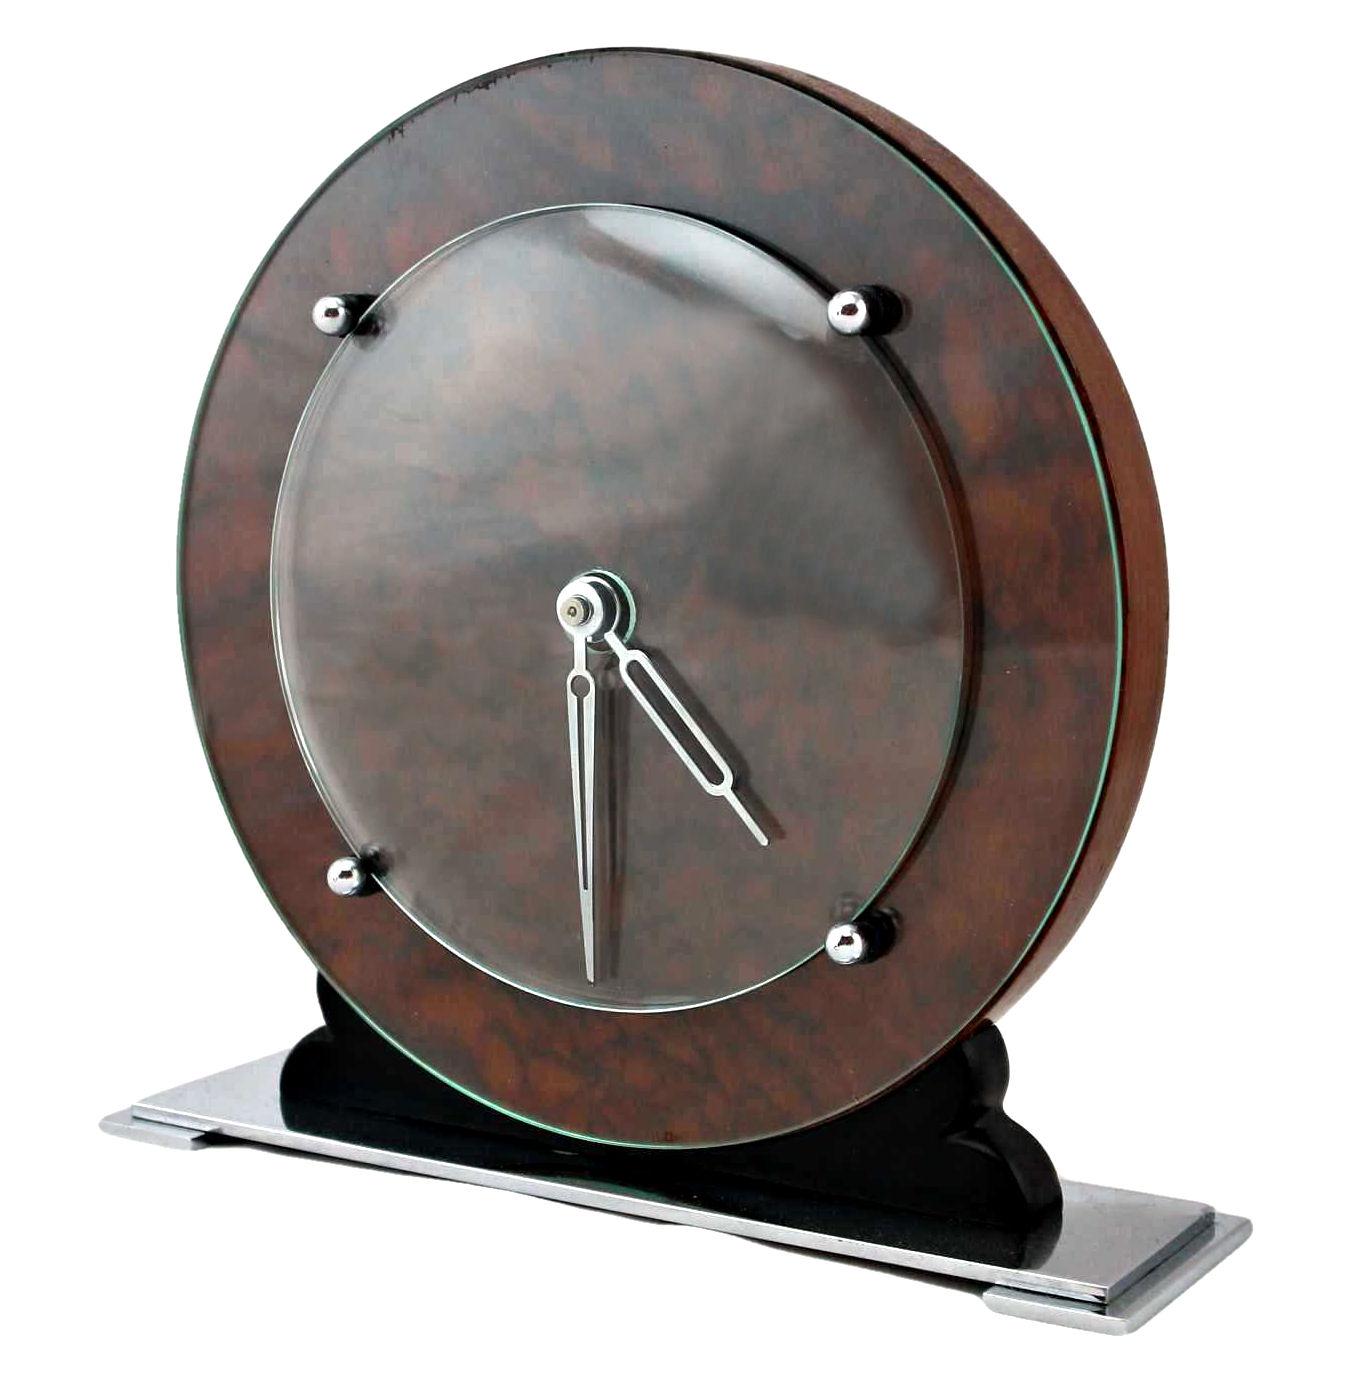 Superb and totally authentic 1930s Art Deco modernist manual wind up clock. Featuring a walnut dial and body with chrome hands and fixtures which are covered by domed glass, all resting on a chrome plinth. This clock oozes style, perfect for a desk